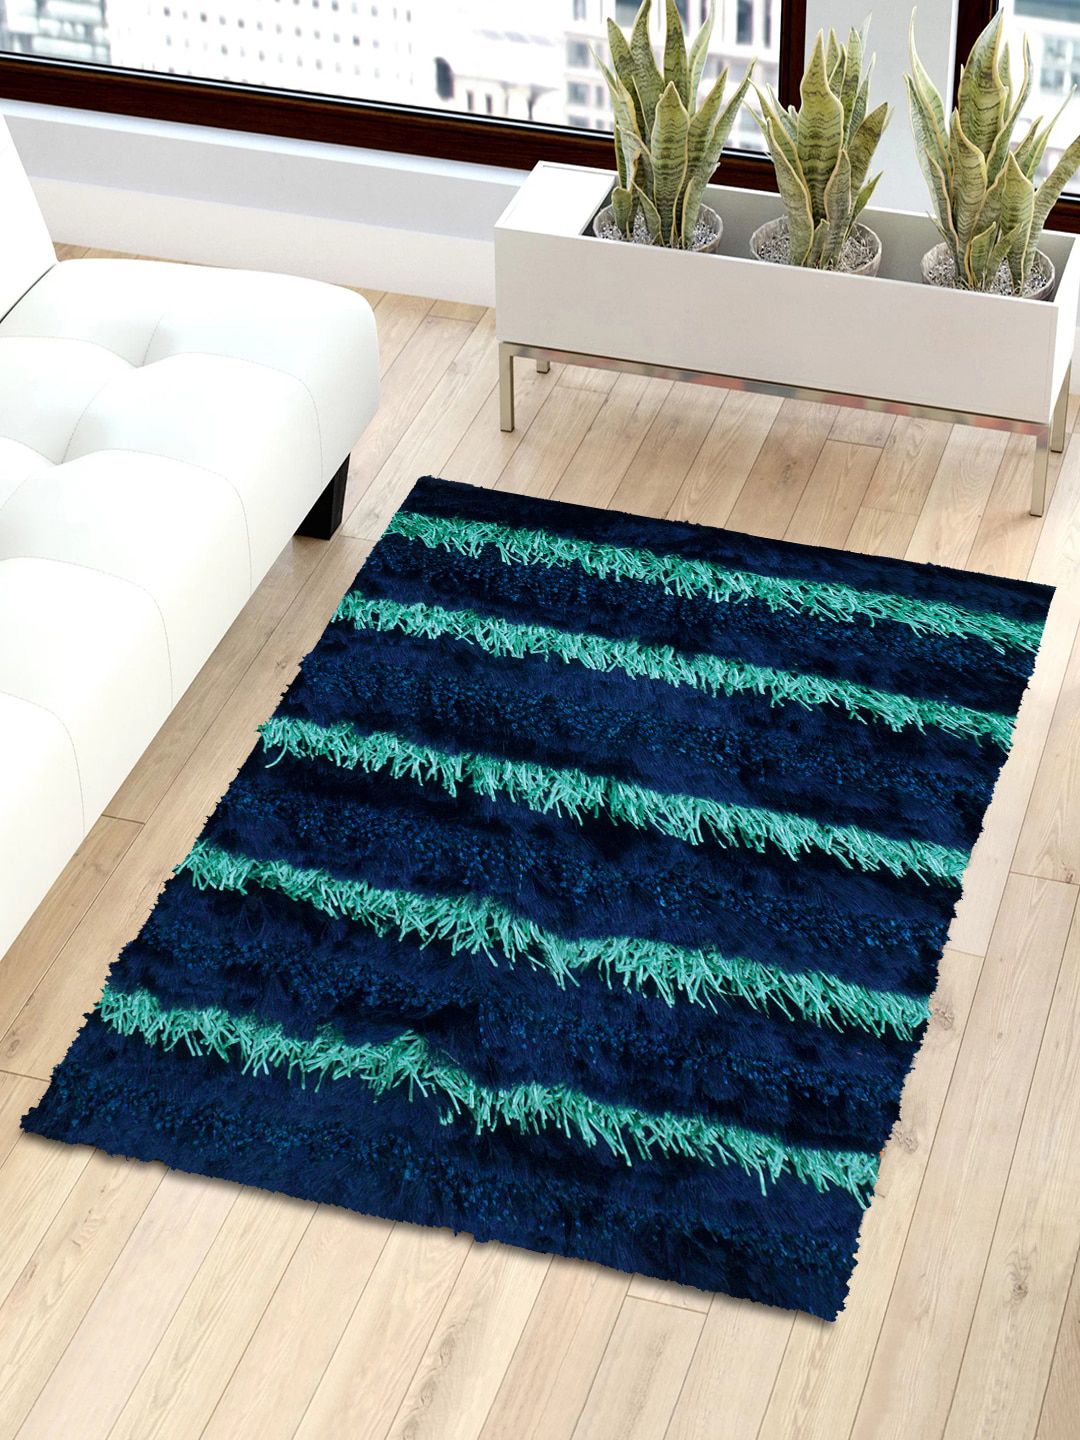 Story@home Blue Striped Shaggy Anti-Skid Carpet Price in India